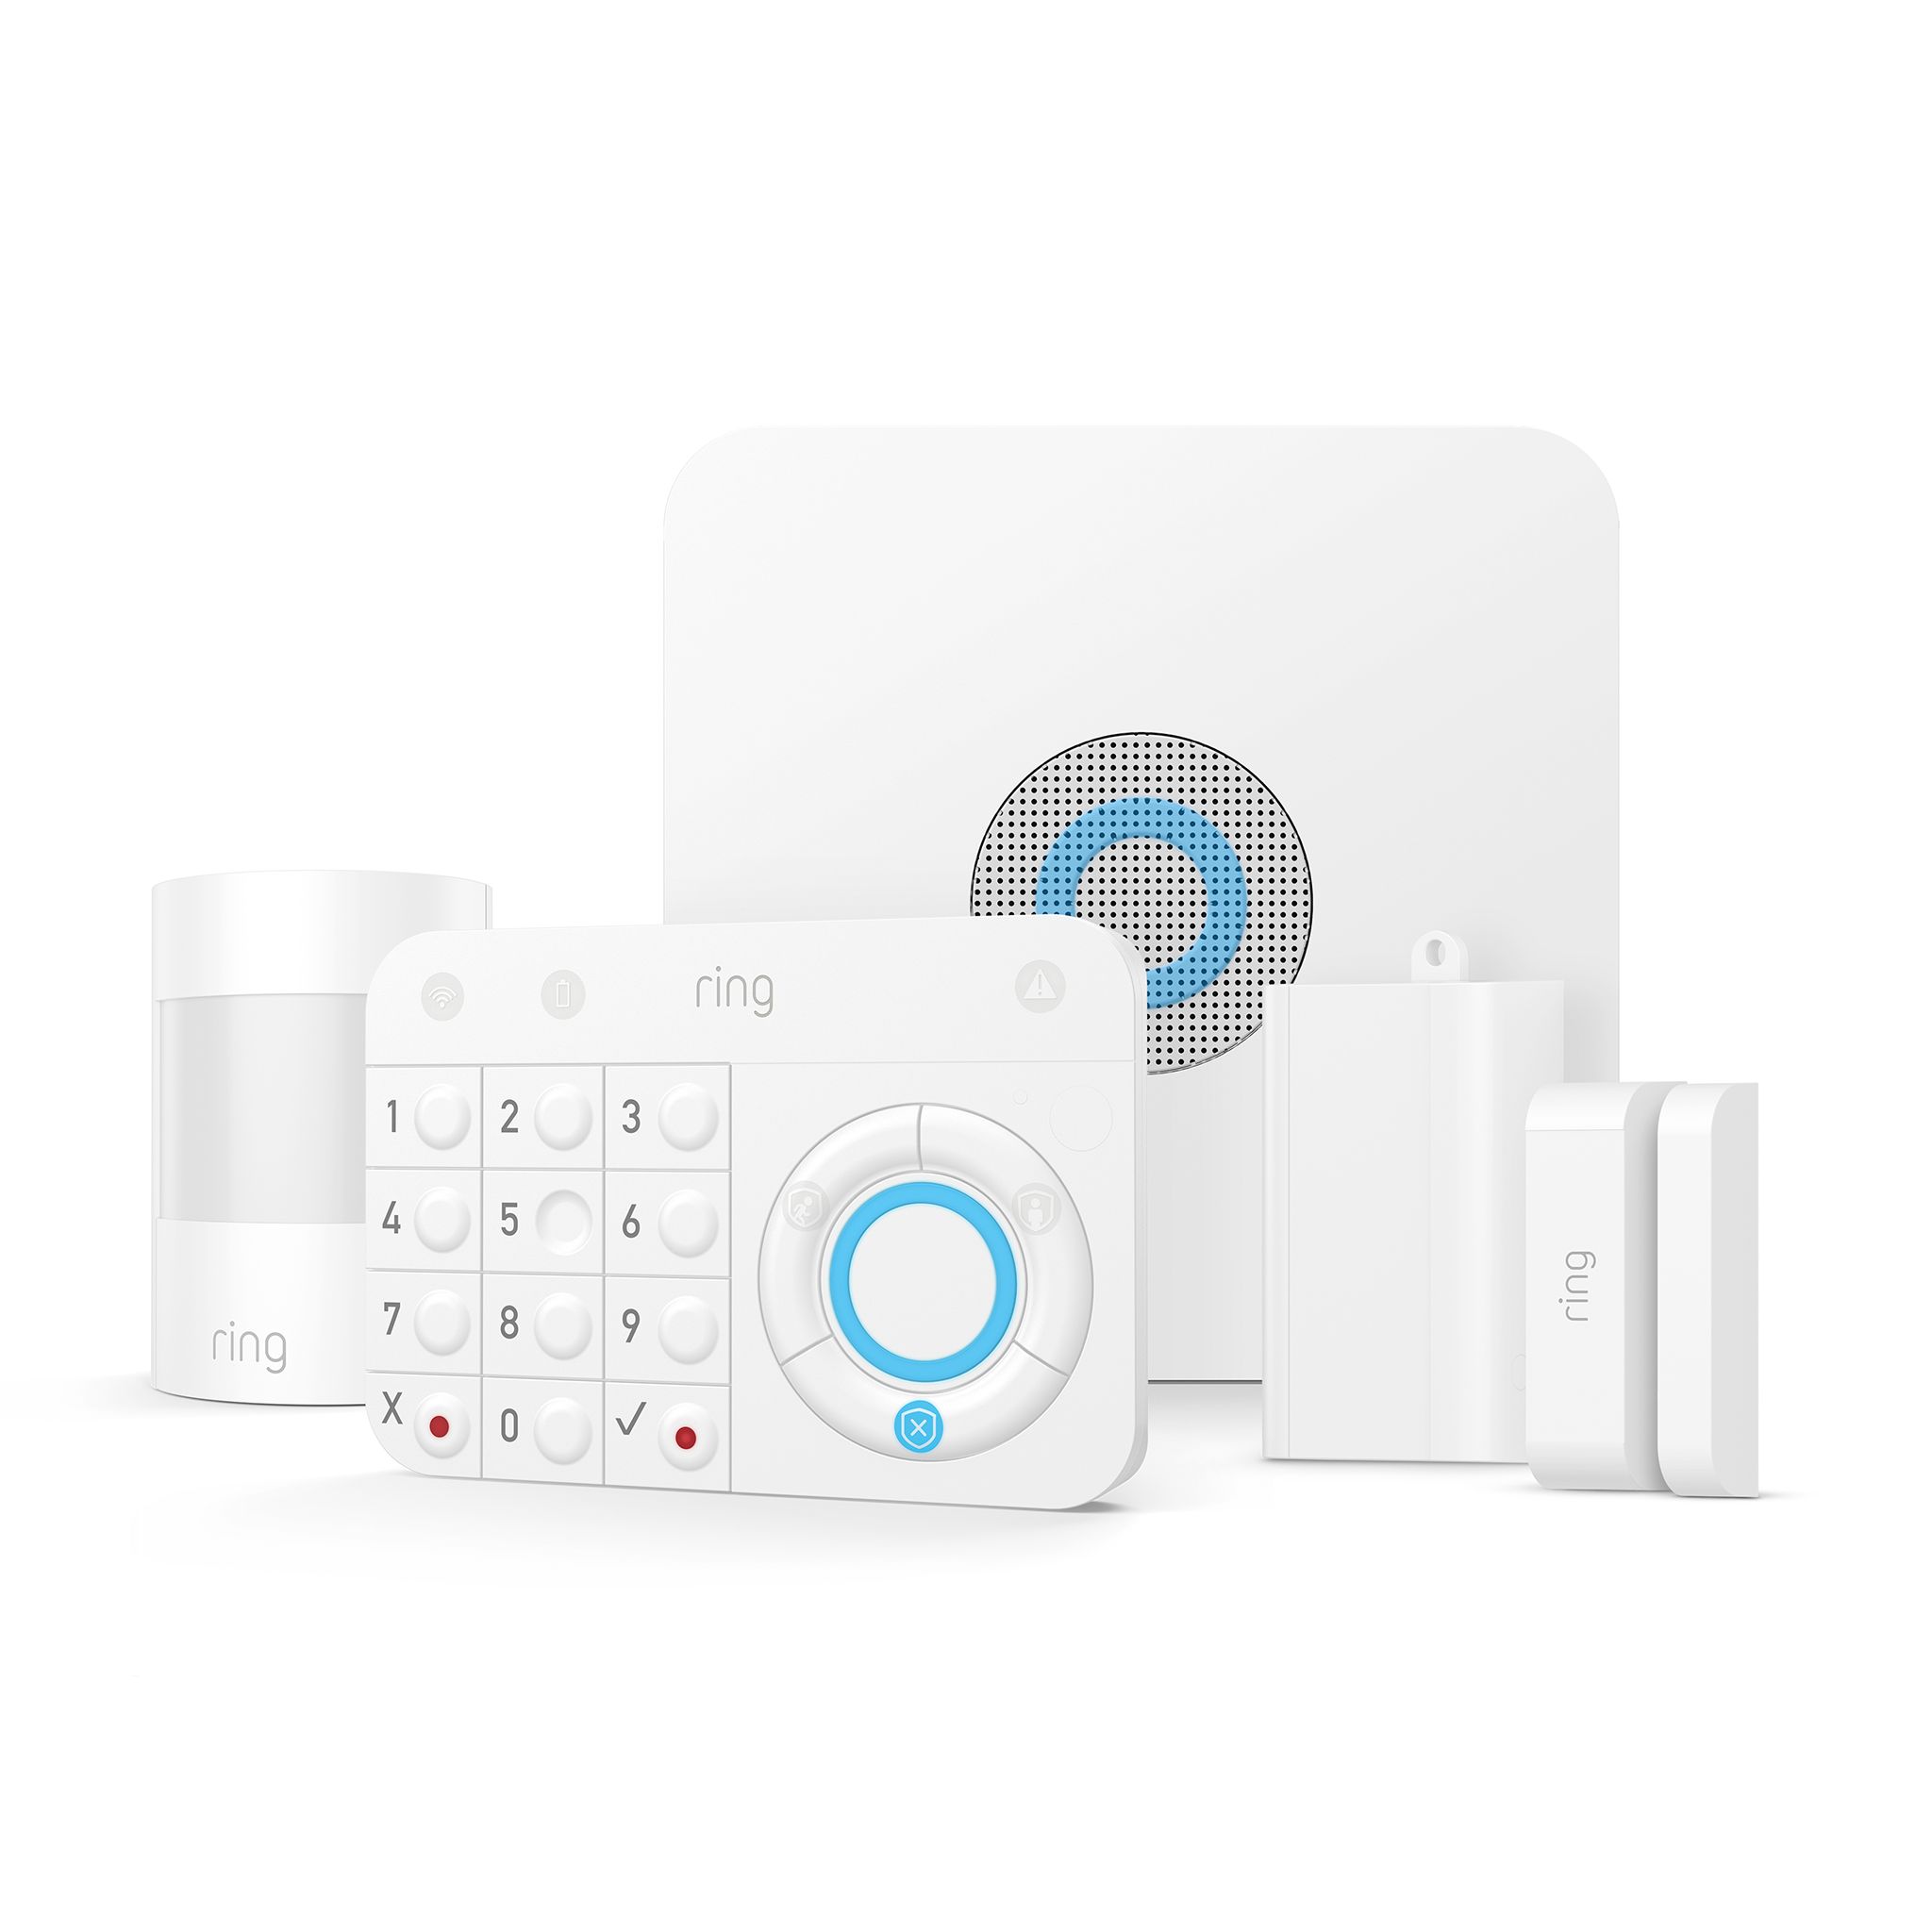 Ring Alarm professional monitoring gets a lot more expensive